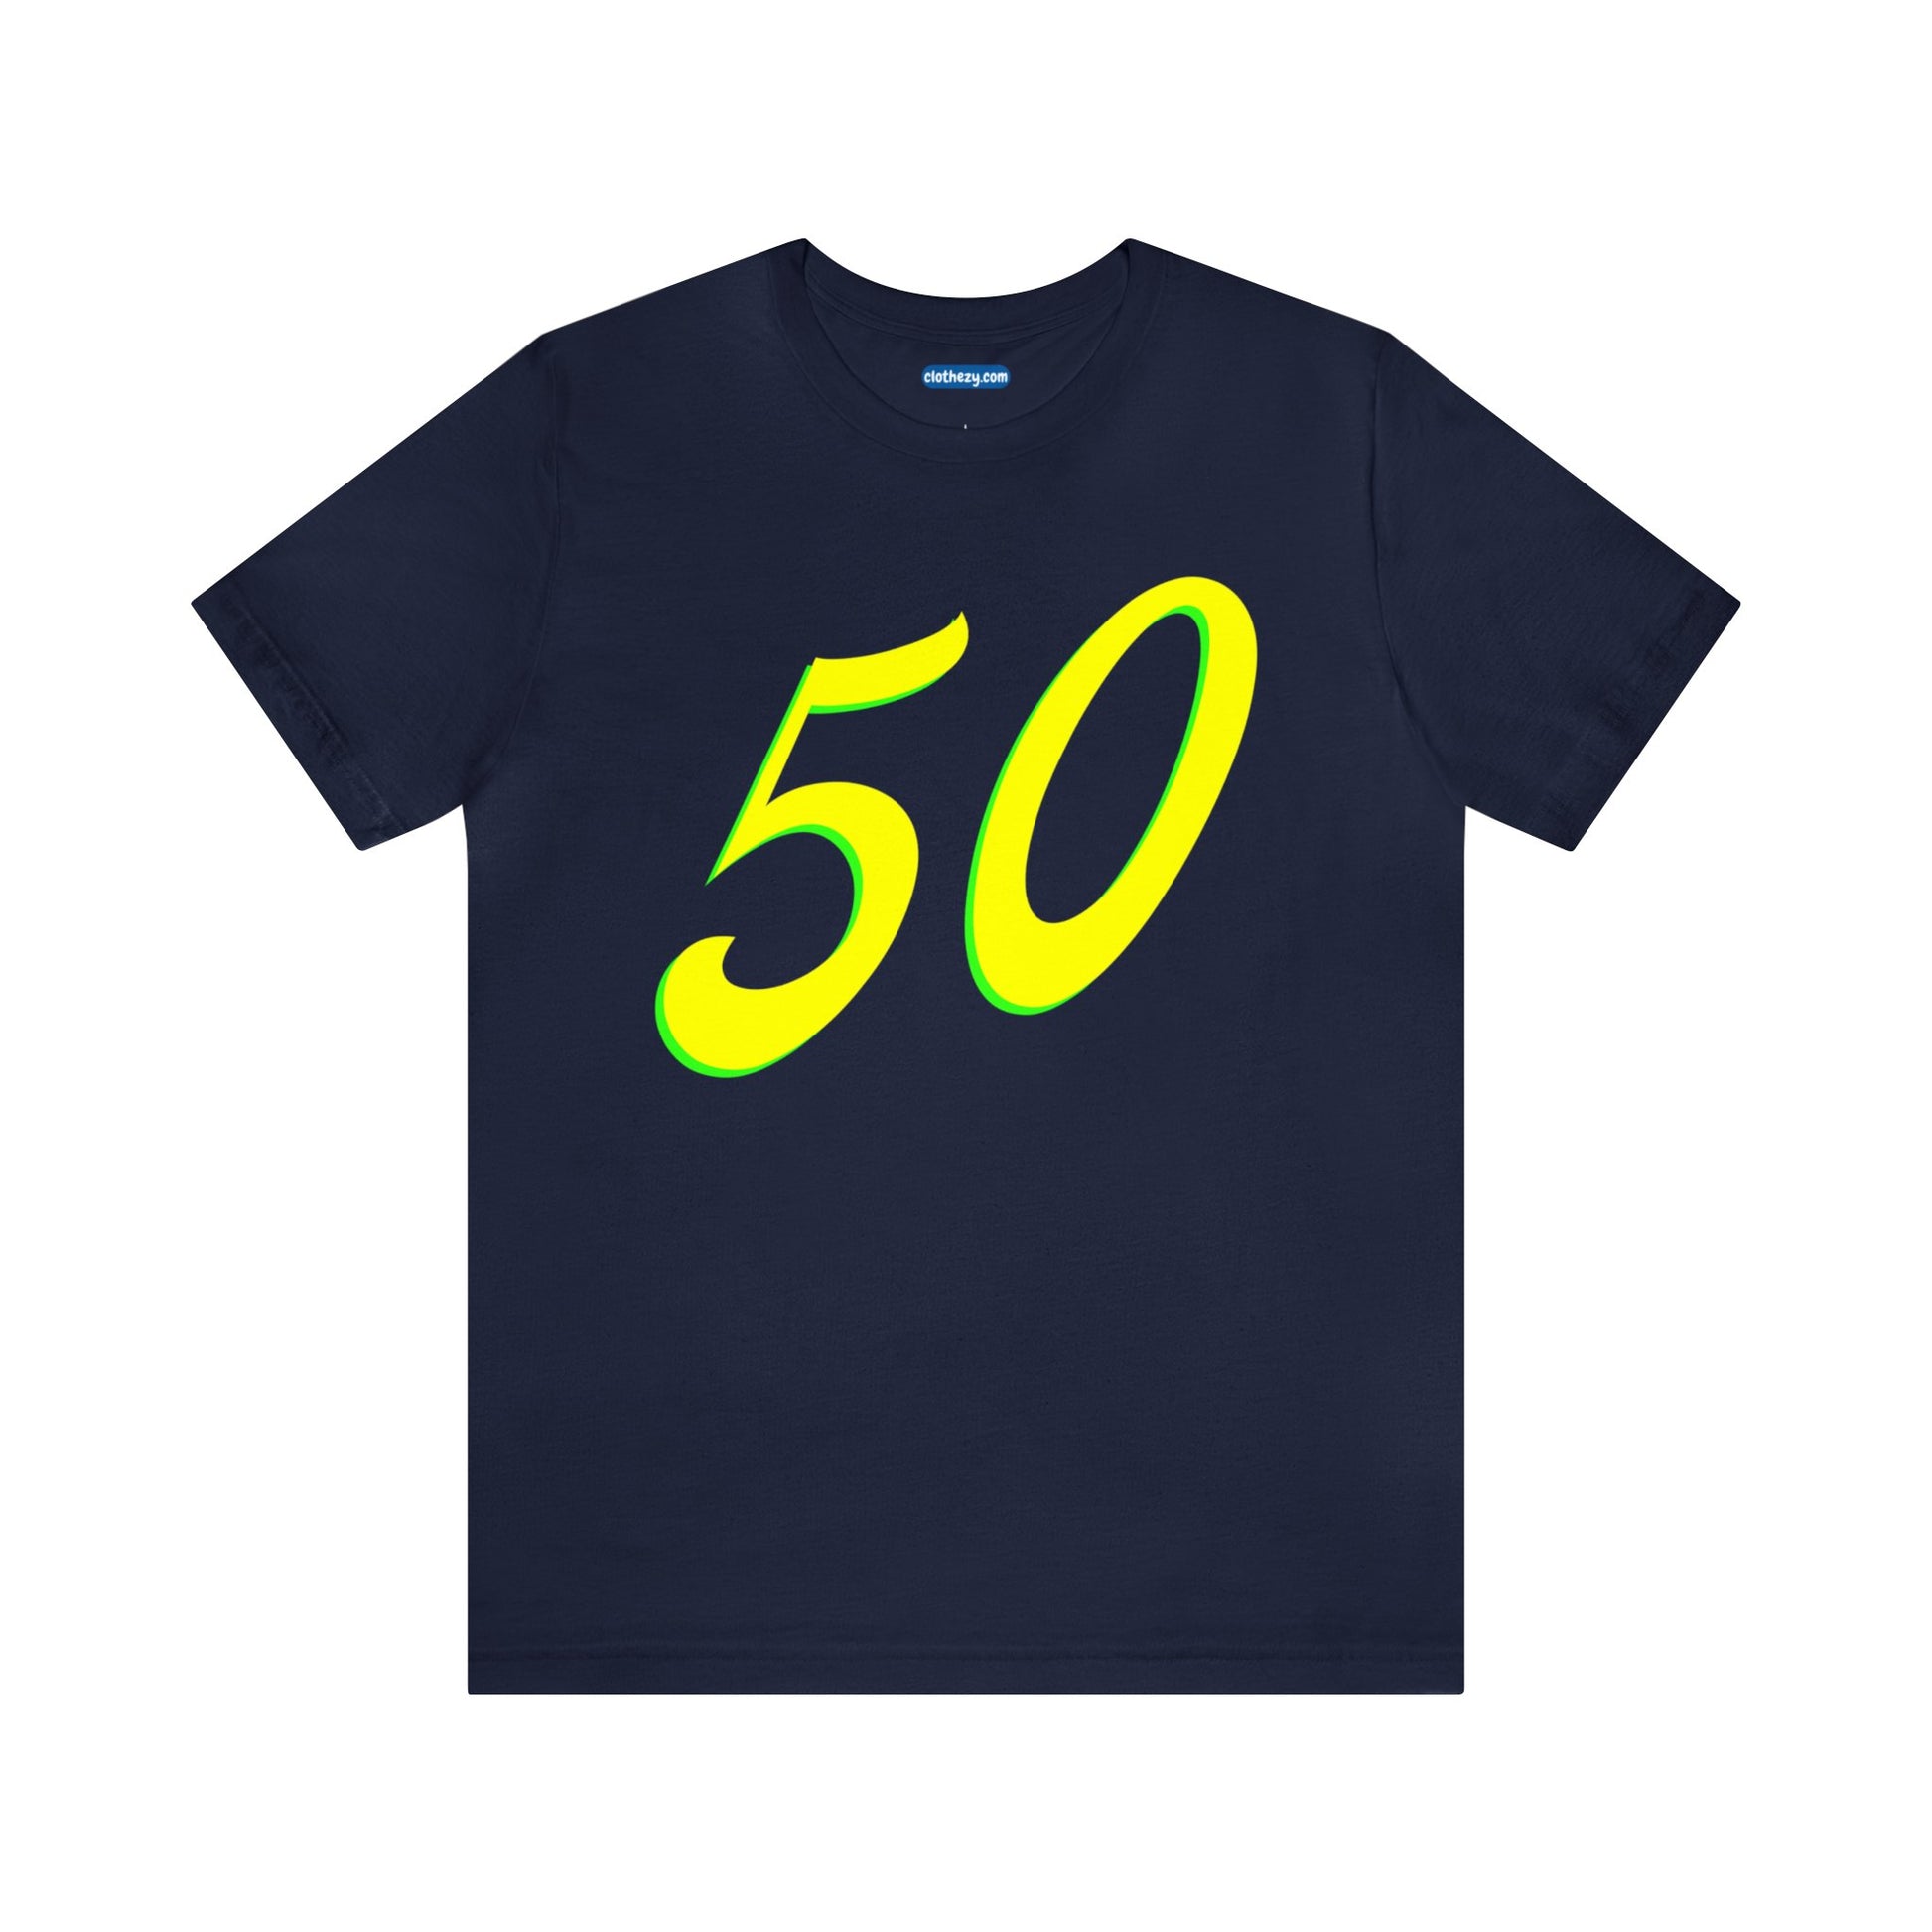 Number 50 Design - Soft Cotton Tee for birthdays and celebrations, Gift for friends and family, Multiple Options by clothezy.com in Navy Size Small - Buy Now